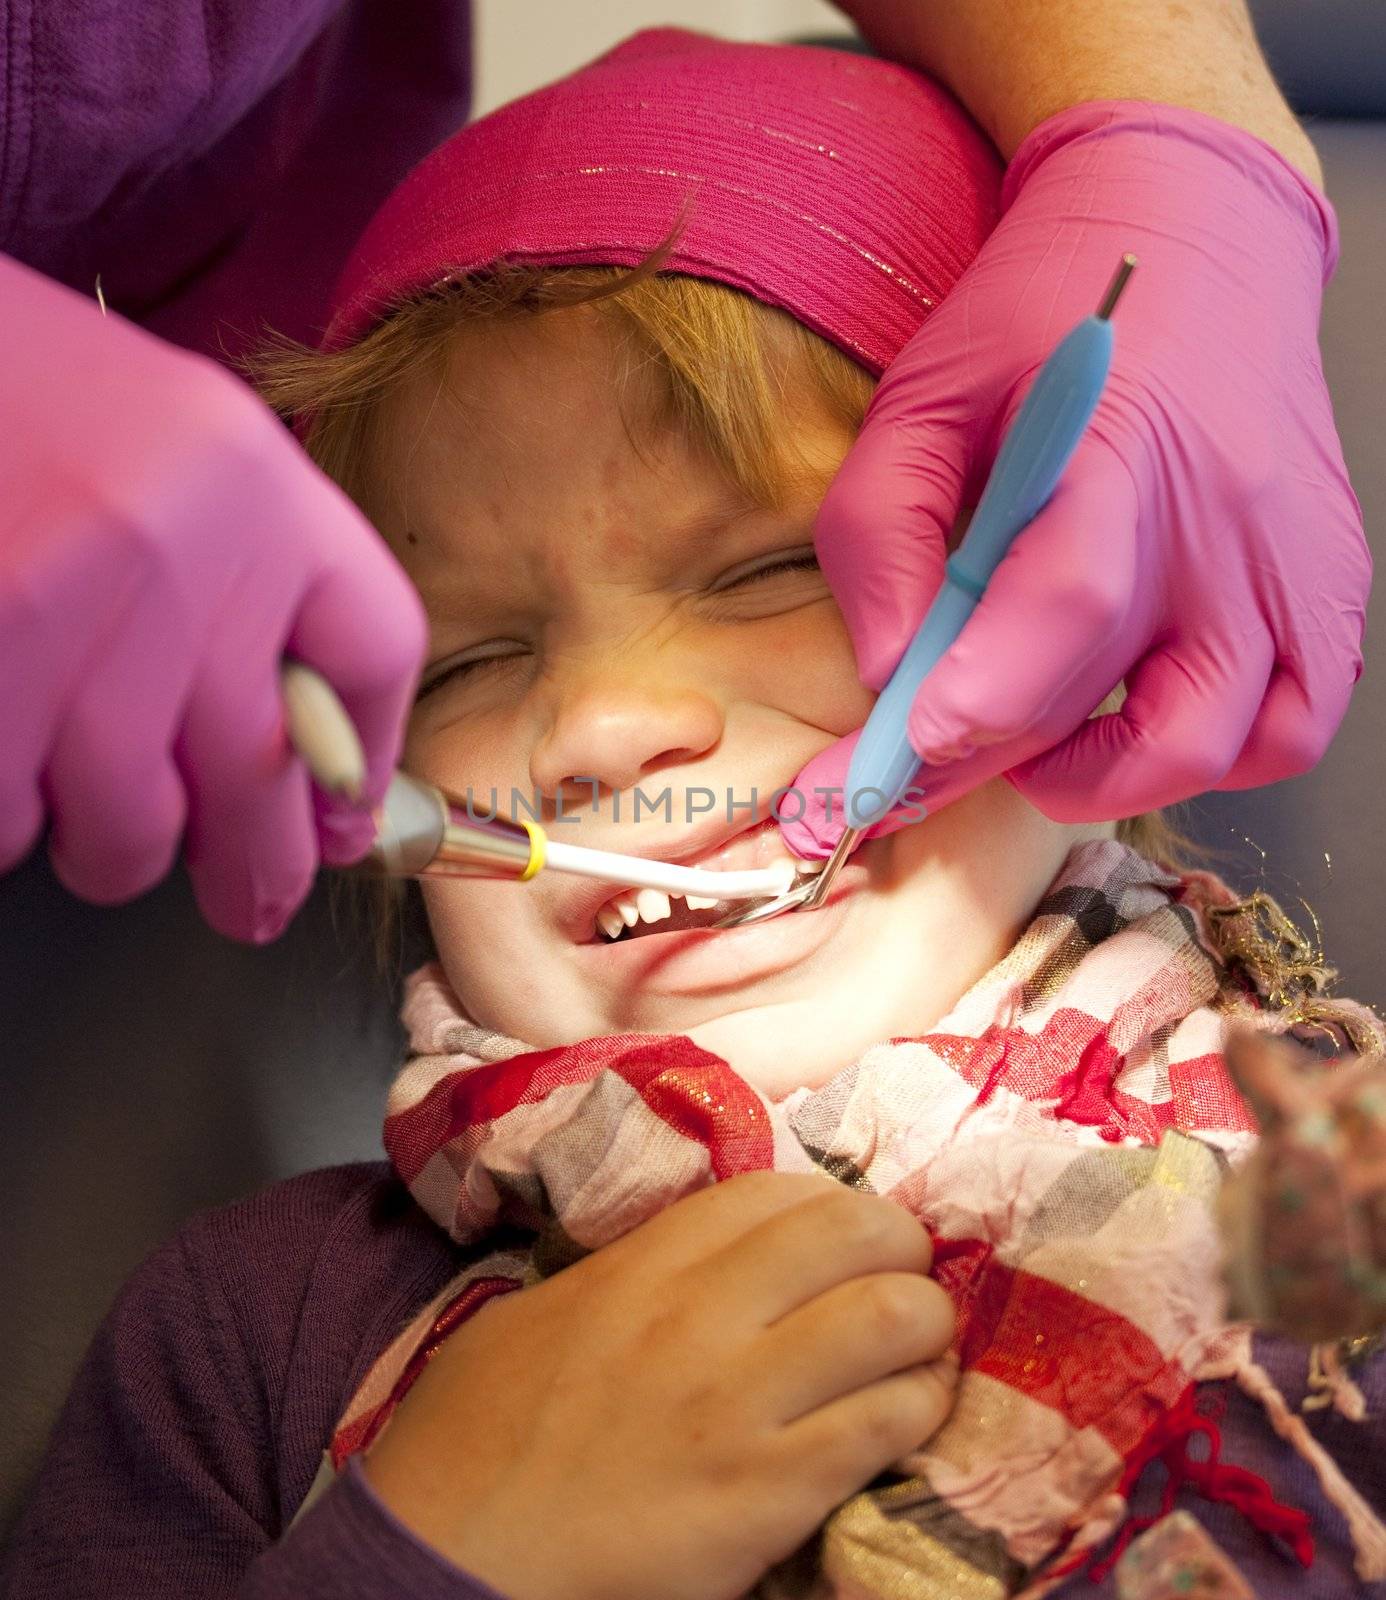 Child in pain at dentist by kavring